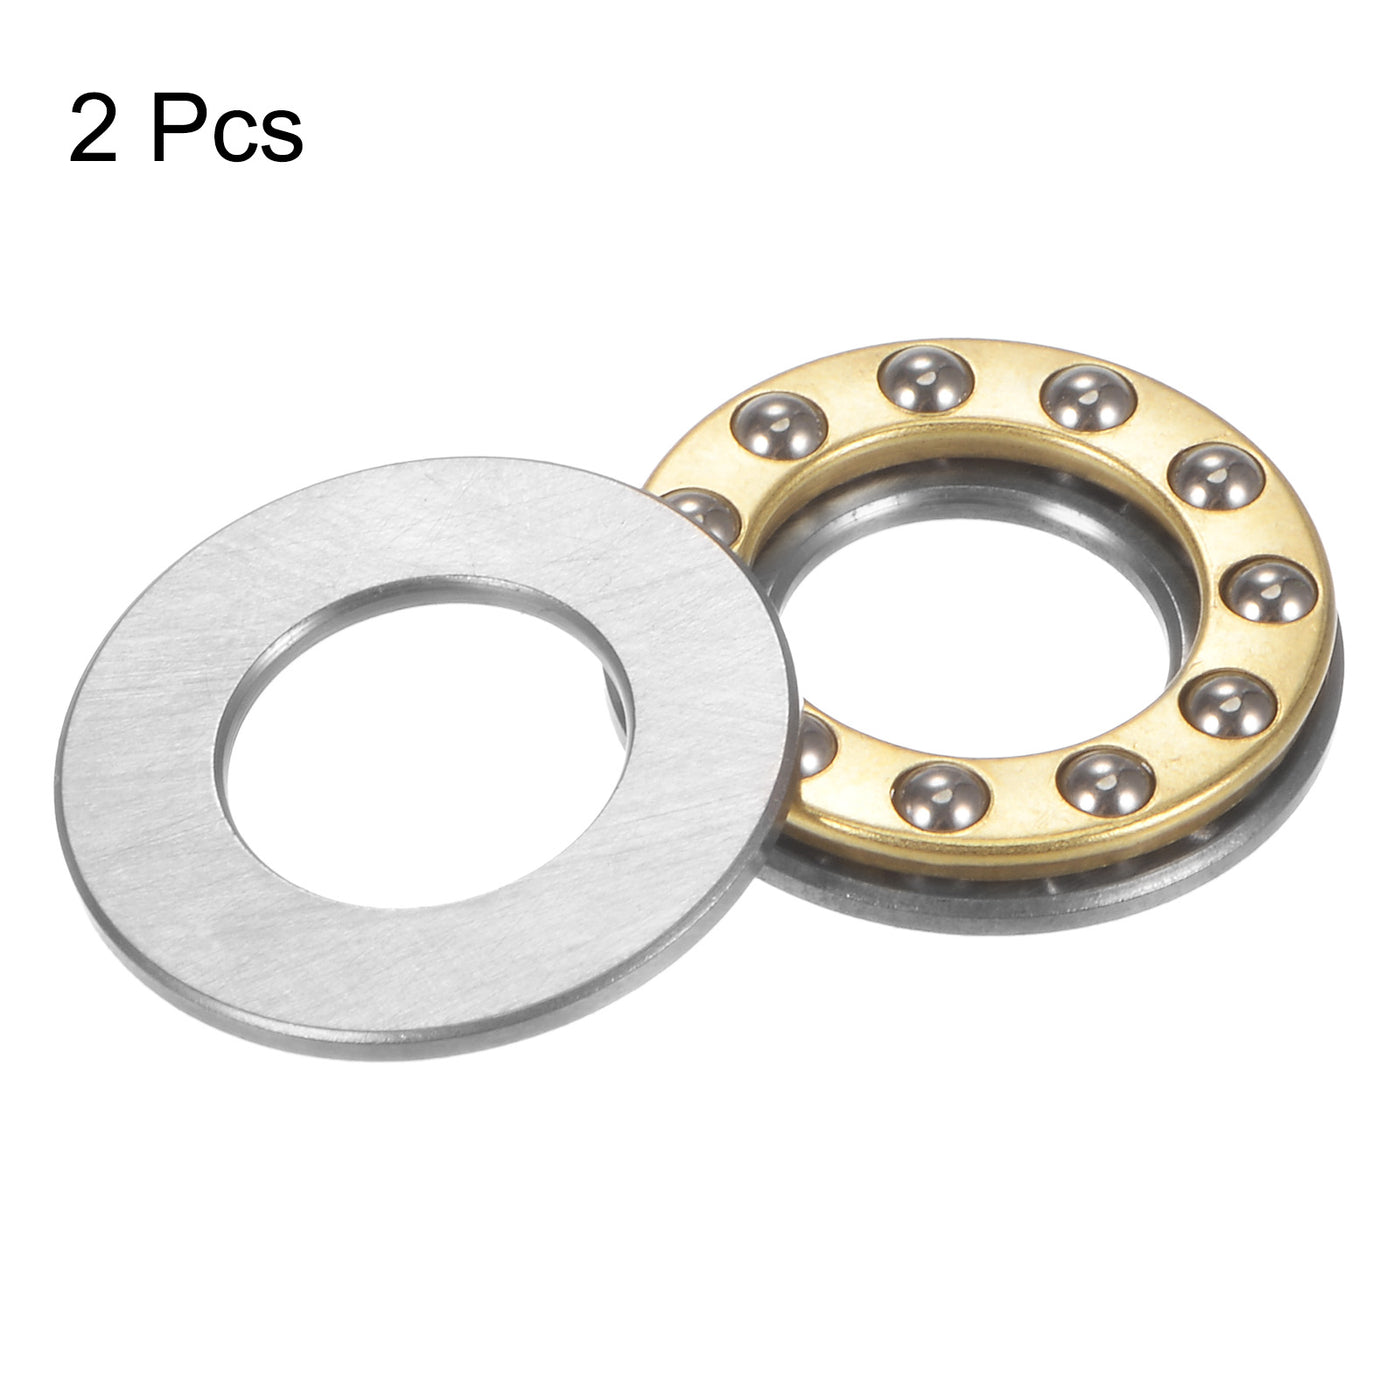 uxcell Uxcell F12-21M Thrust Ball Bearing 12x21x5mm Brass with Washers ABEC3 2pcs